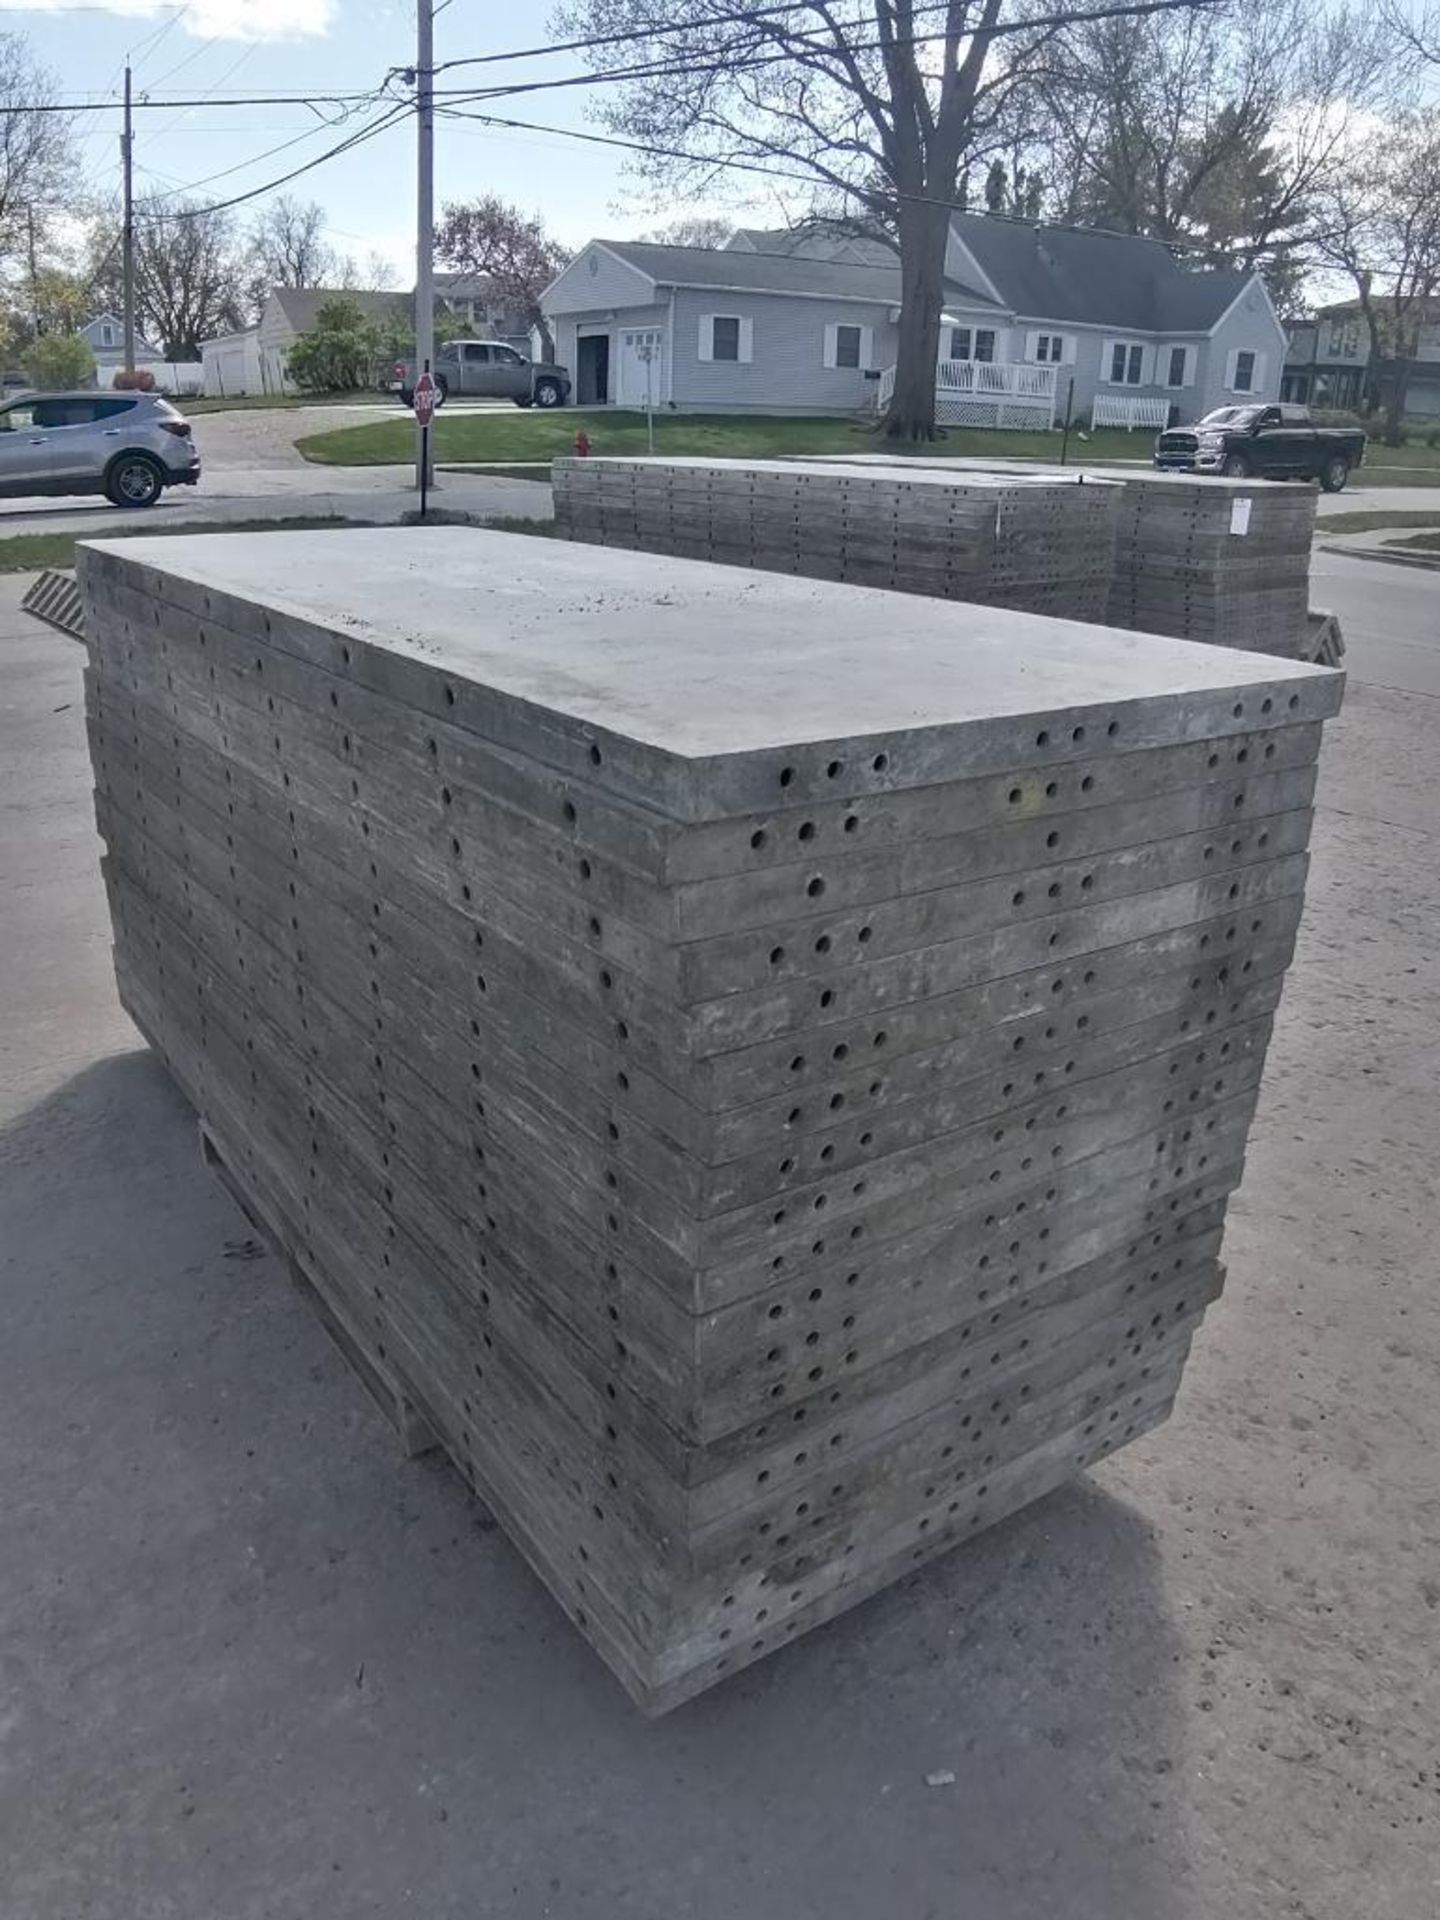 (20) 3' x 8' Wall-Ties Smooth Aluminum Concrete Forms 6-12 Hole Pattern. Located in Mt. Pleasant,